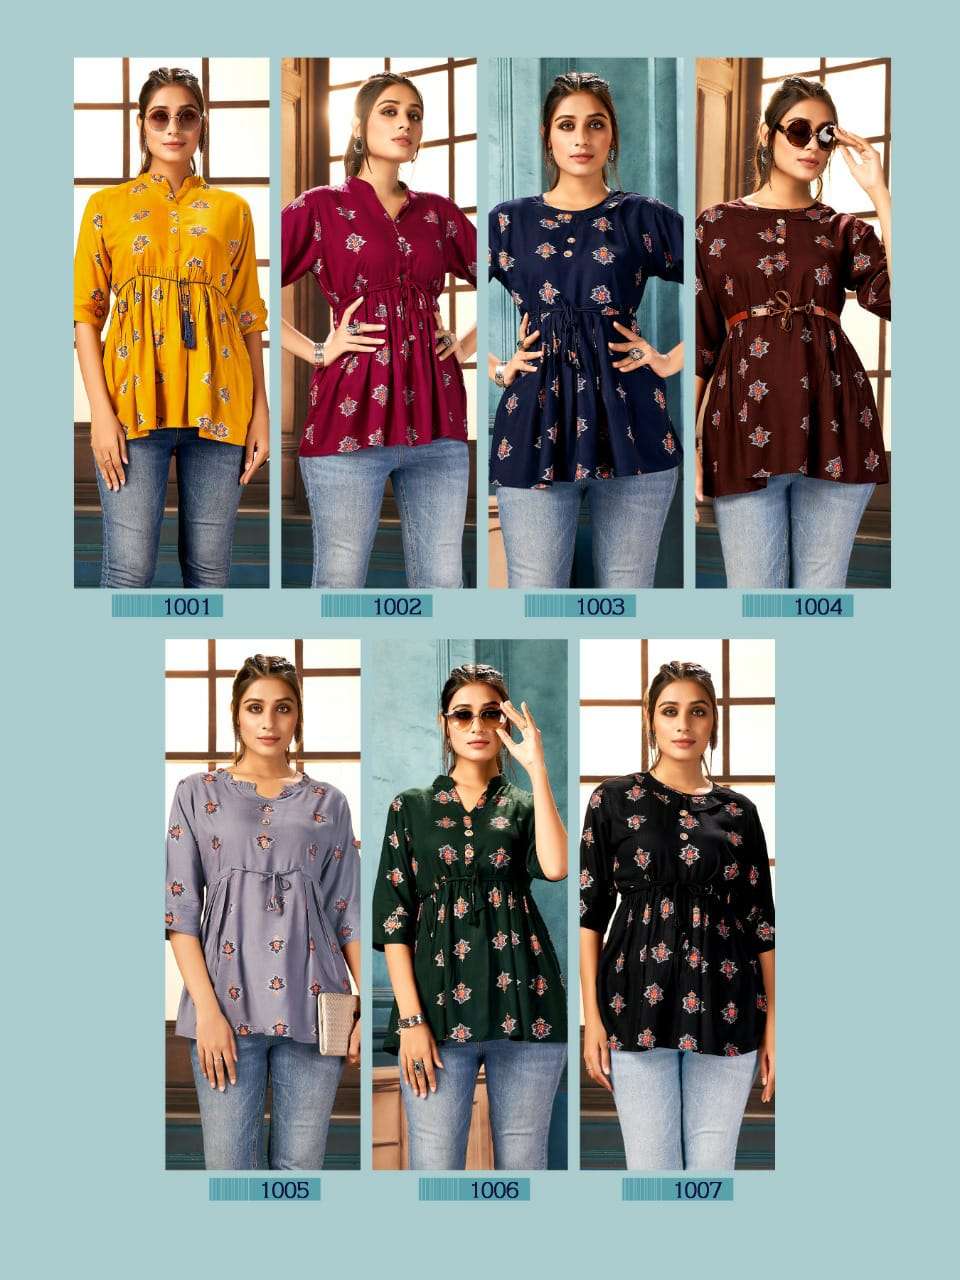 PIGMENT BY ART RIDDHS 1001 TO 1007 SERIES BEAUTIFUL STYLISH FANCY COLORFUL CASUAL WEAR & ETHNIC WEAR RAYON PRINT TOPS AT WHOLESALE PRICE